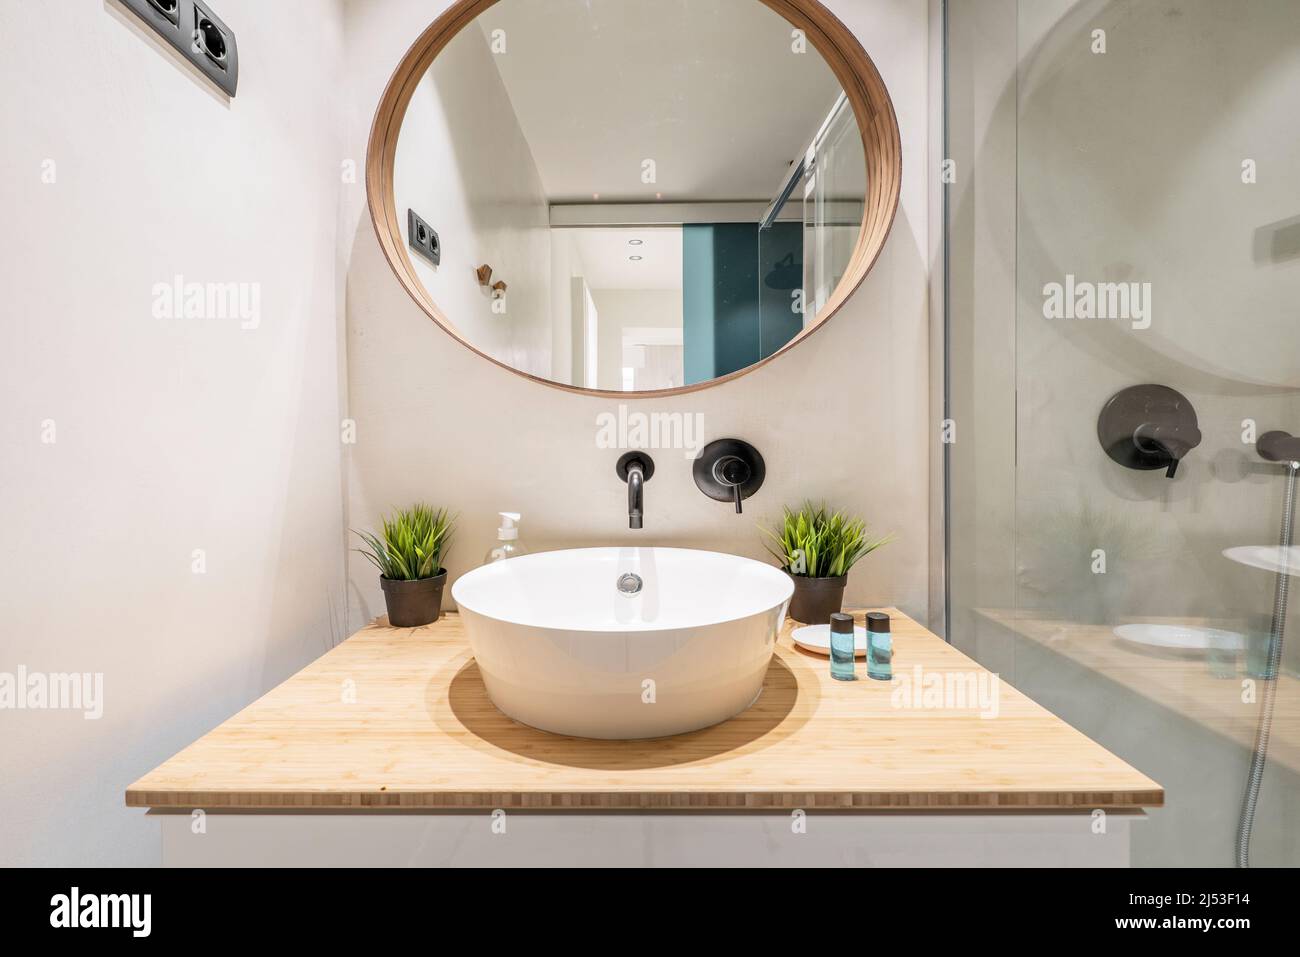 Bathroom with glossy wooden wall unit, light varnished wooden countertop, decorative plants and circular mirror with wooden frame and shower cabin wit Stock Photo